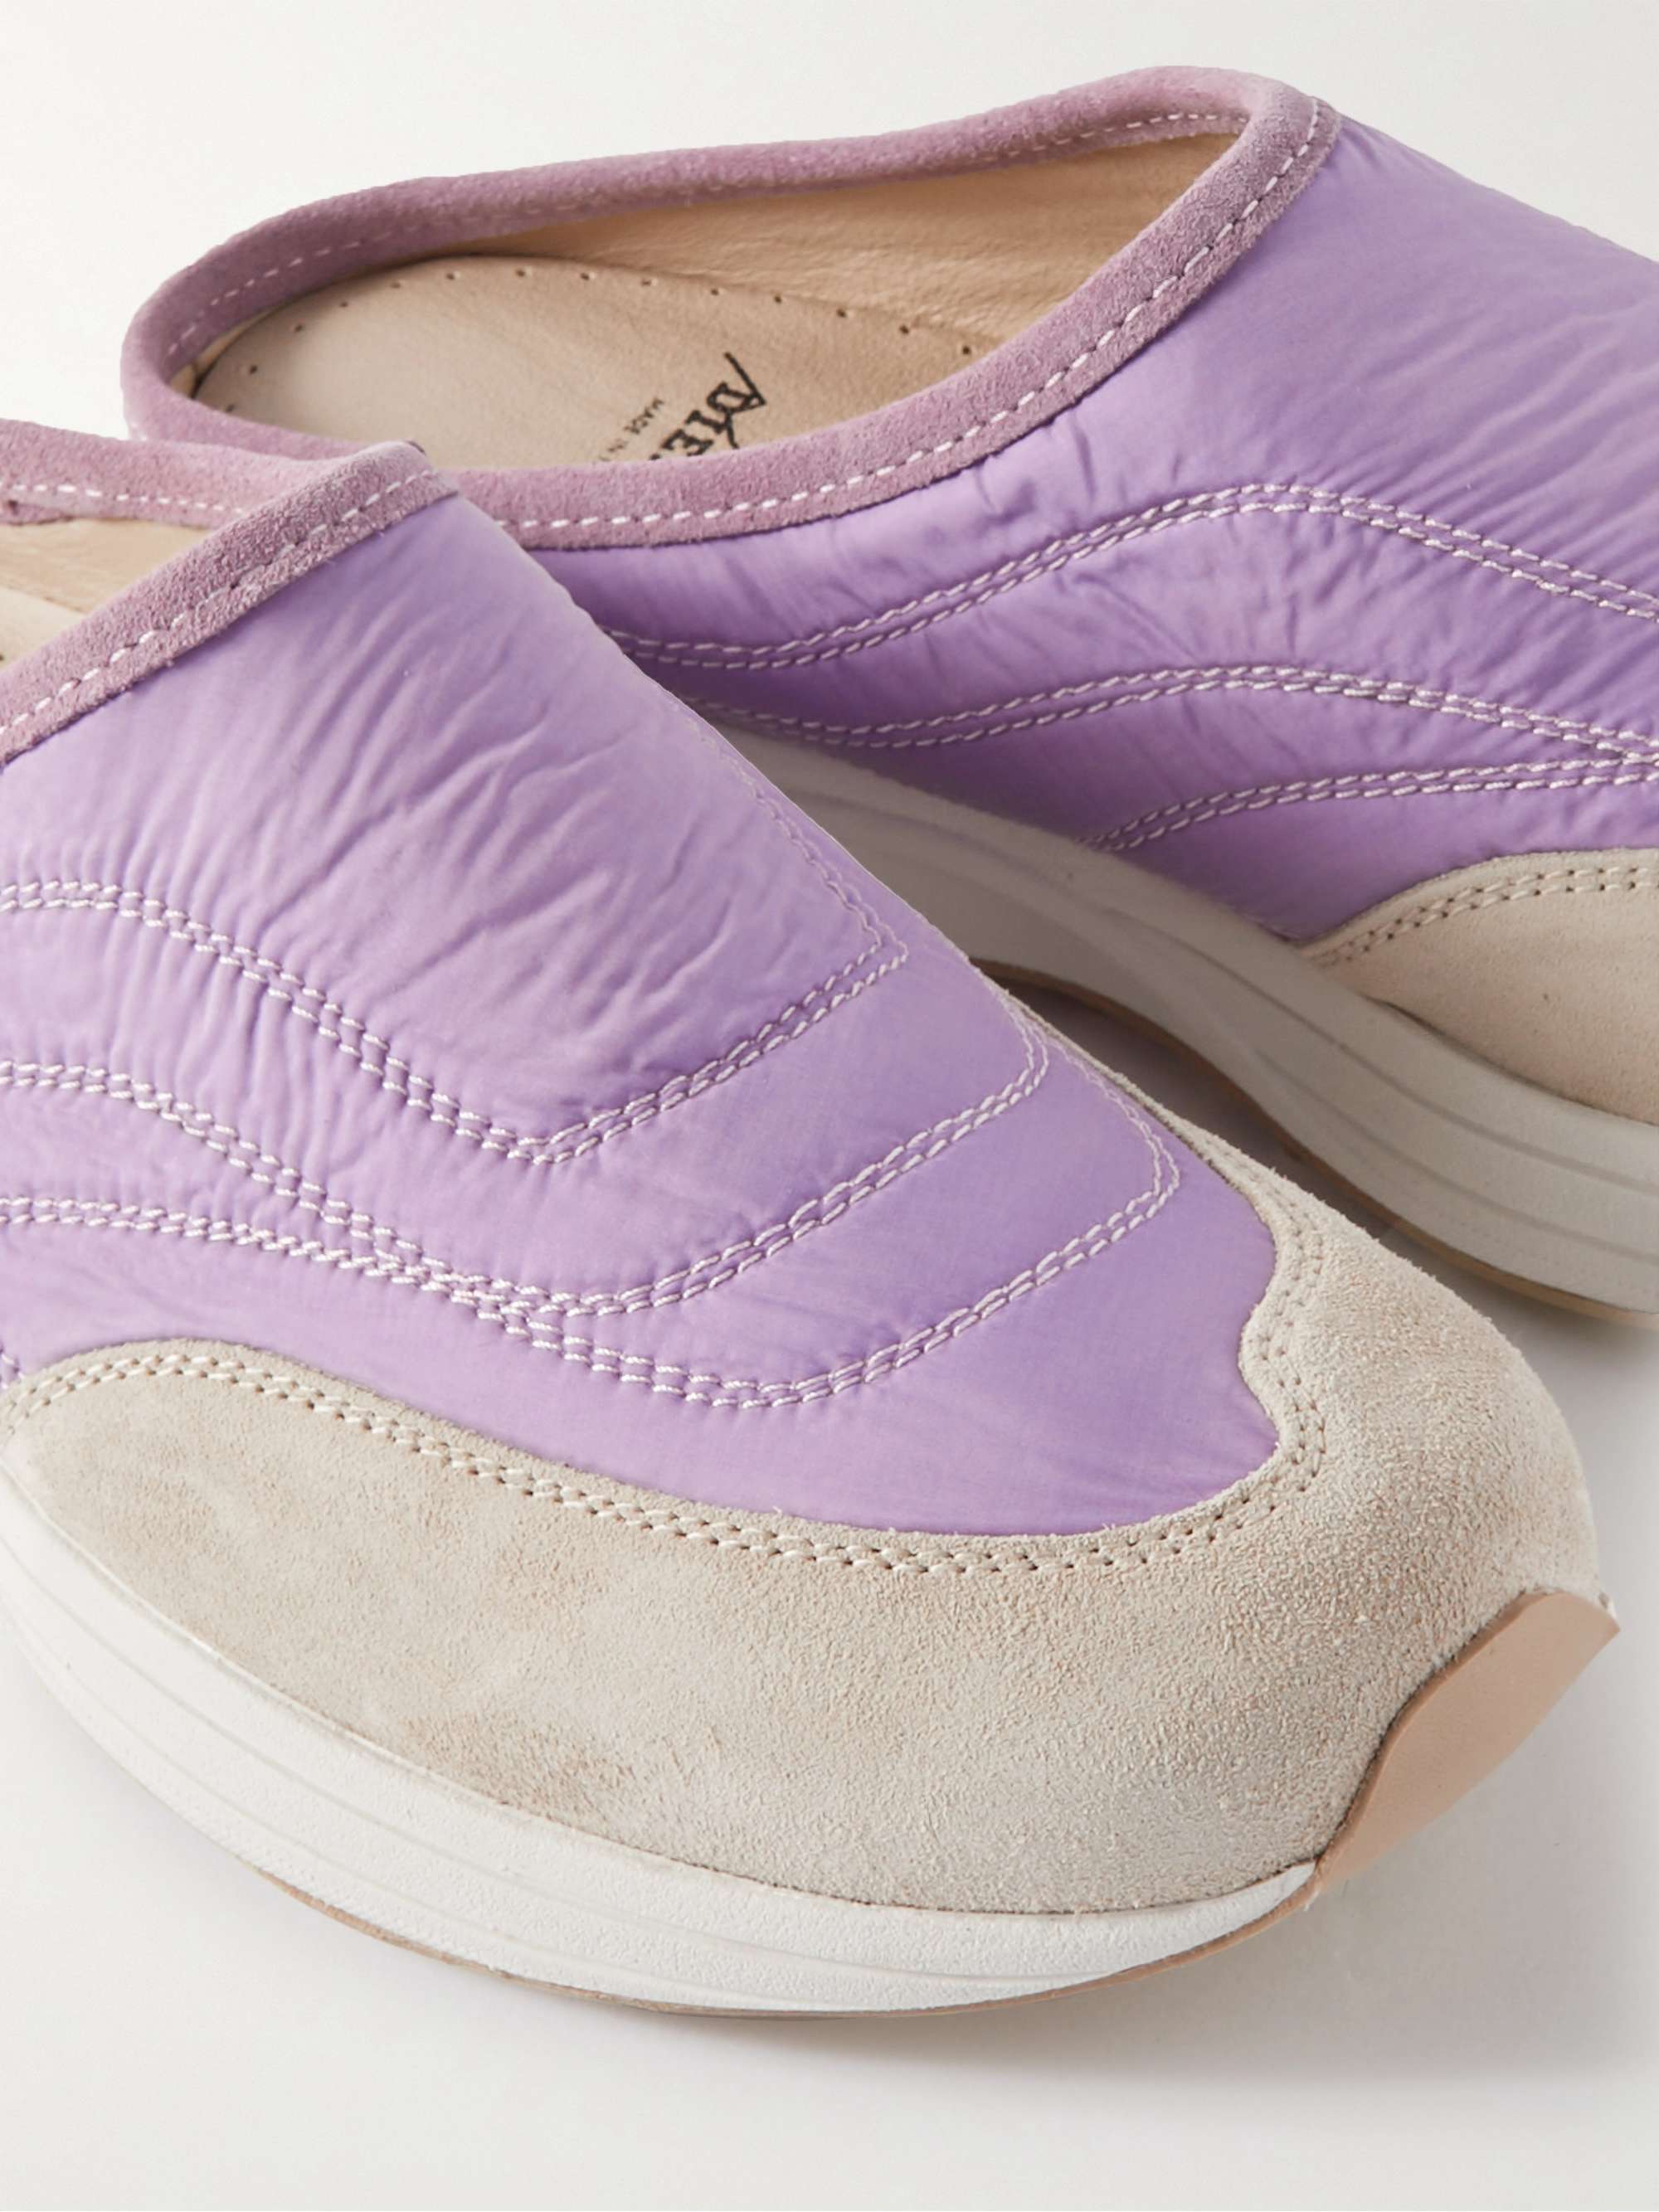 DIEMME Maggiore Slip-On Suede-Trimmed Nylon Sneakers